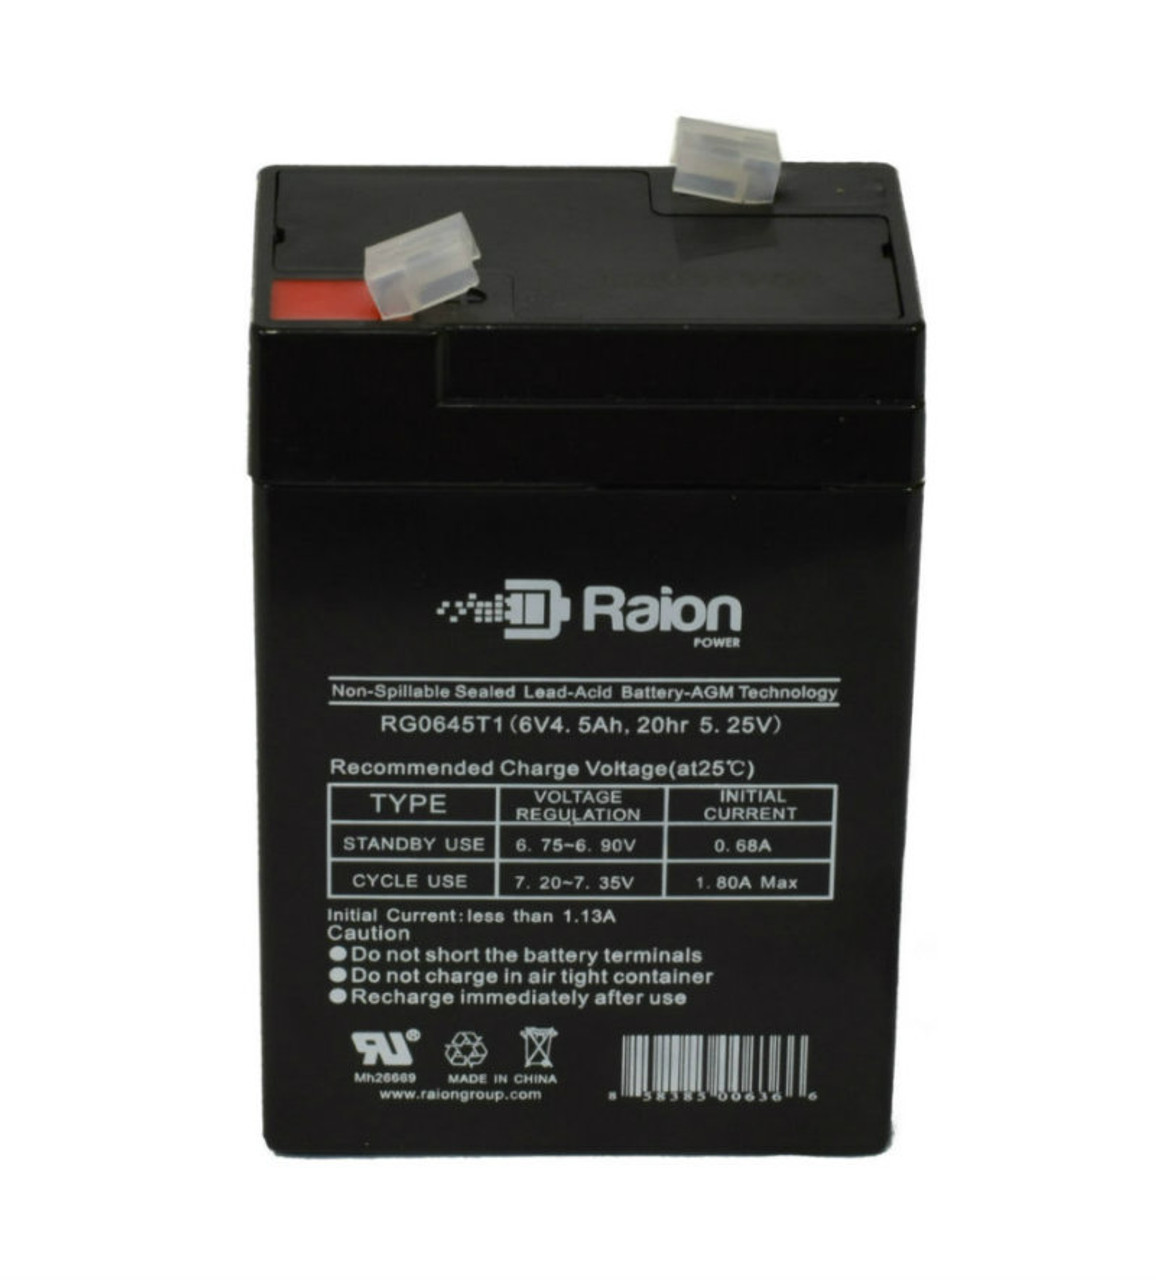 Raion Power RG0645T1 Replacement Battery Cartridge for McPhilben / Daybright BL930007